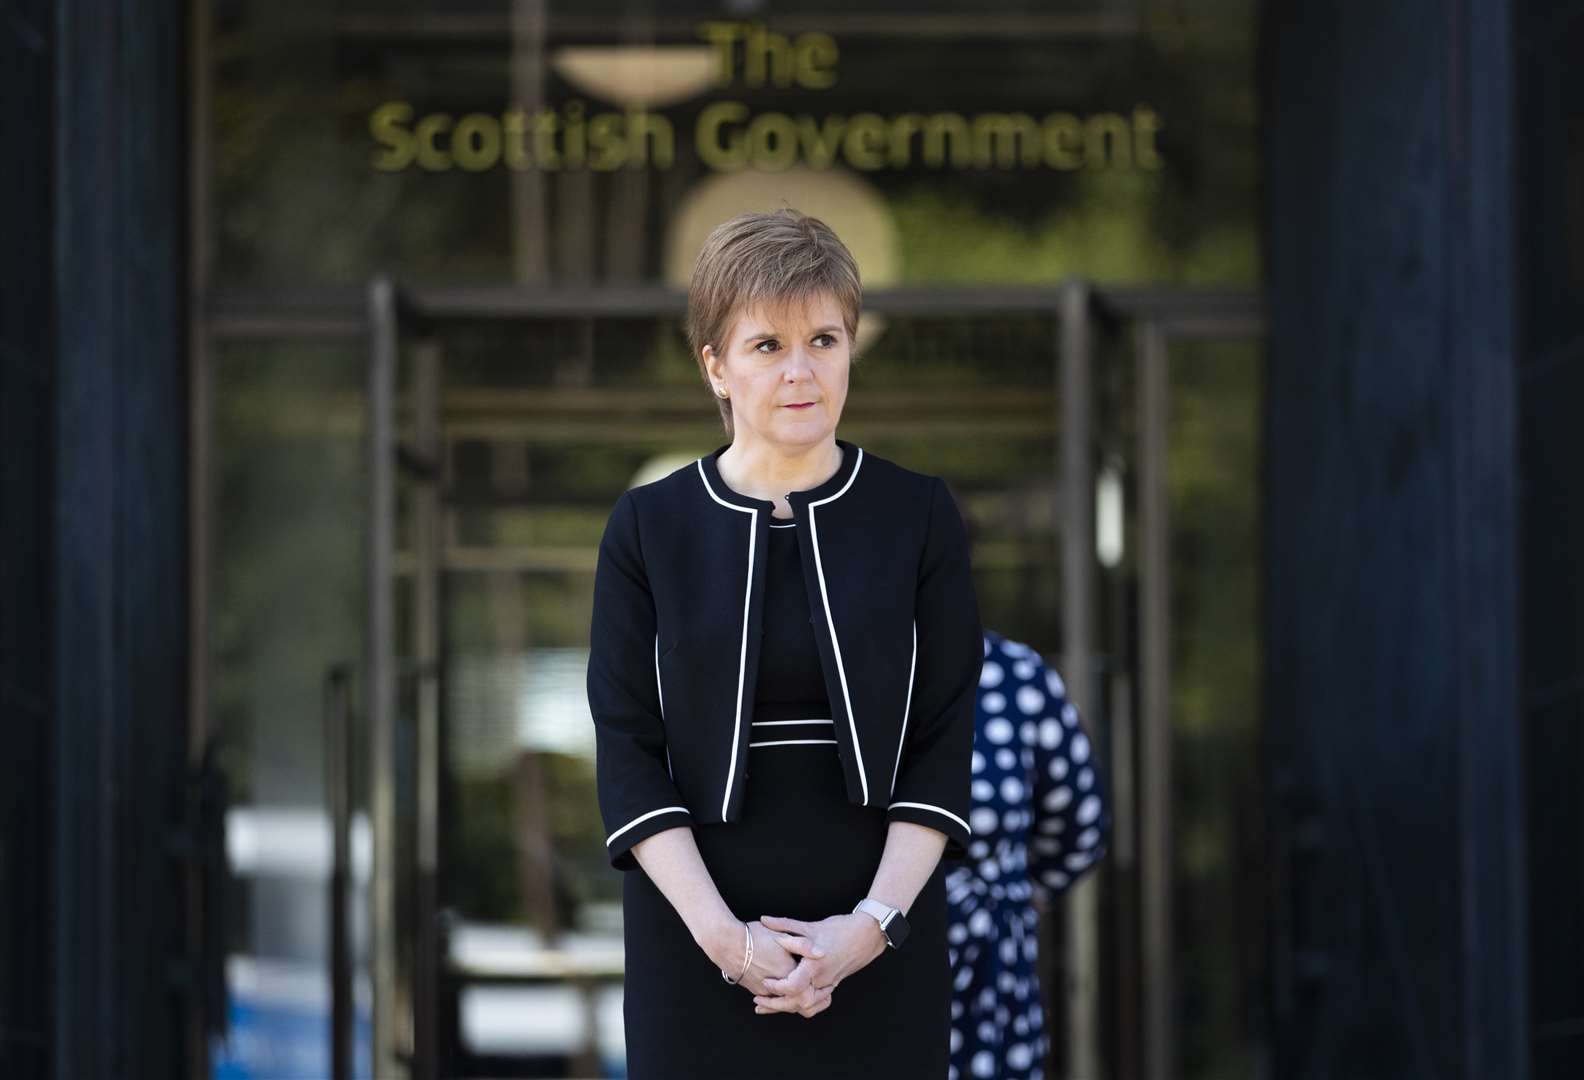 Nicola Sturgeon has warned people may need to repeatedly isolate to defeat Covid-19 (Jane Barlow/PA)